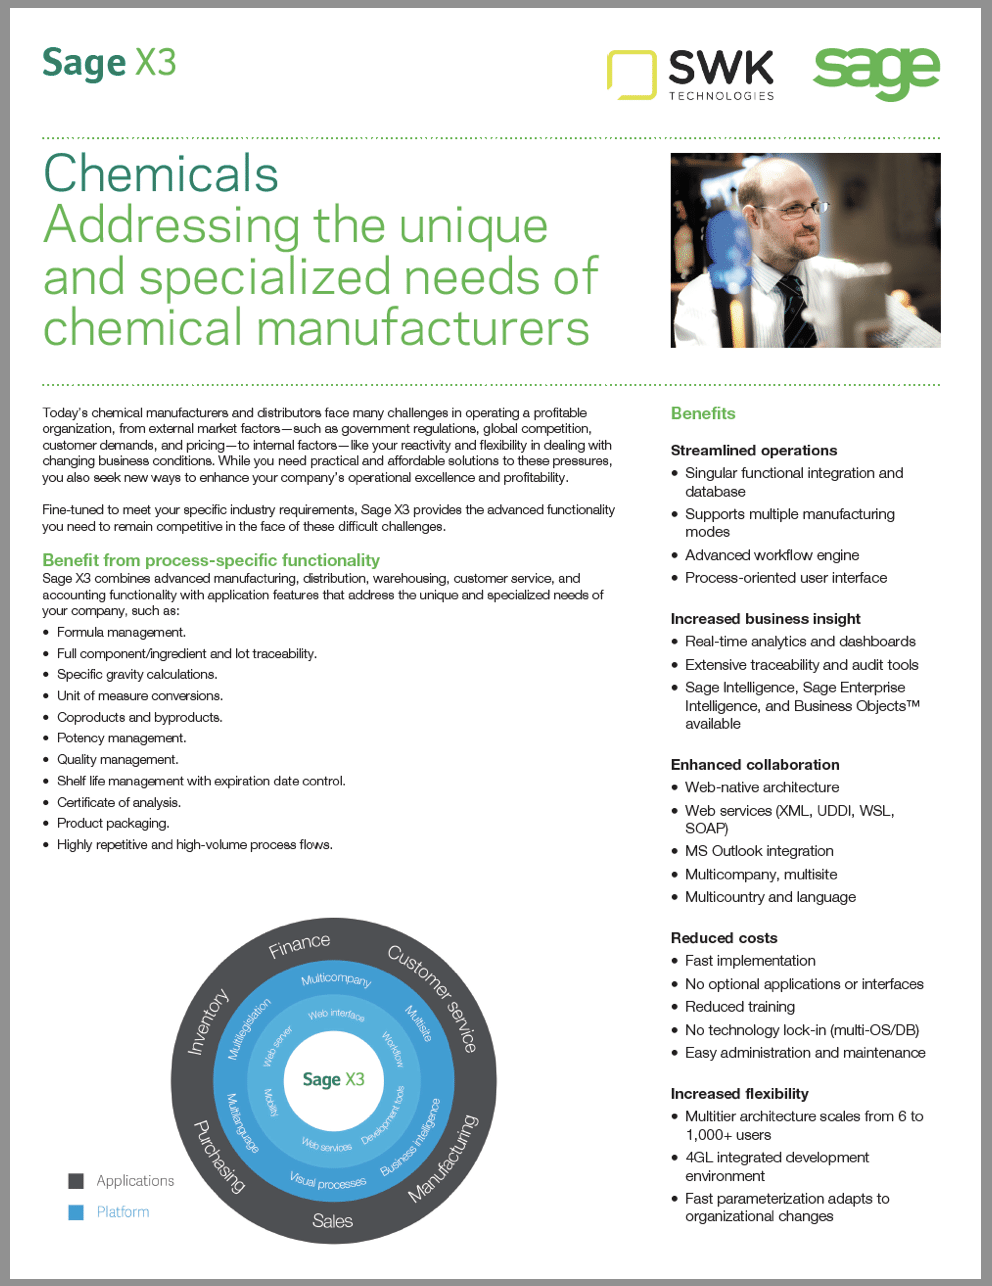 Gain the chemical manufacturing competitive advantage with full traceability, shelf-life management, formula management, and more – all from Sage Enterprise Management (formerly Sage X3).